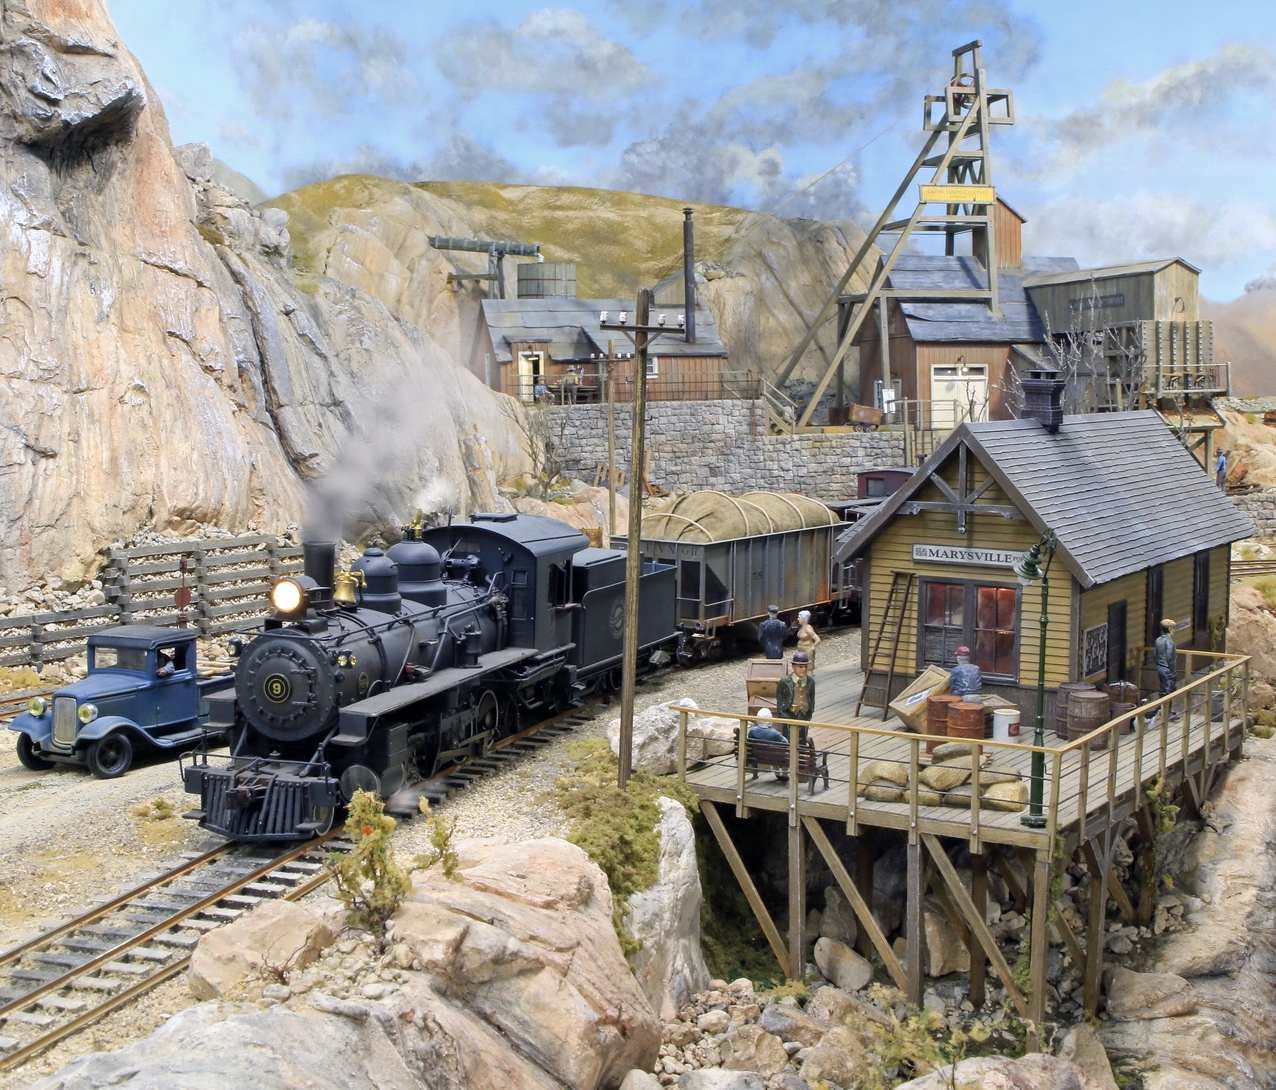 Passing the Marysville Depot with the Empire Mine in background – Peter Jackson|Photo Gallery